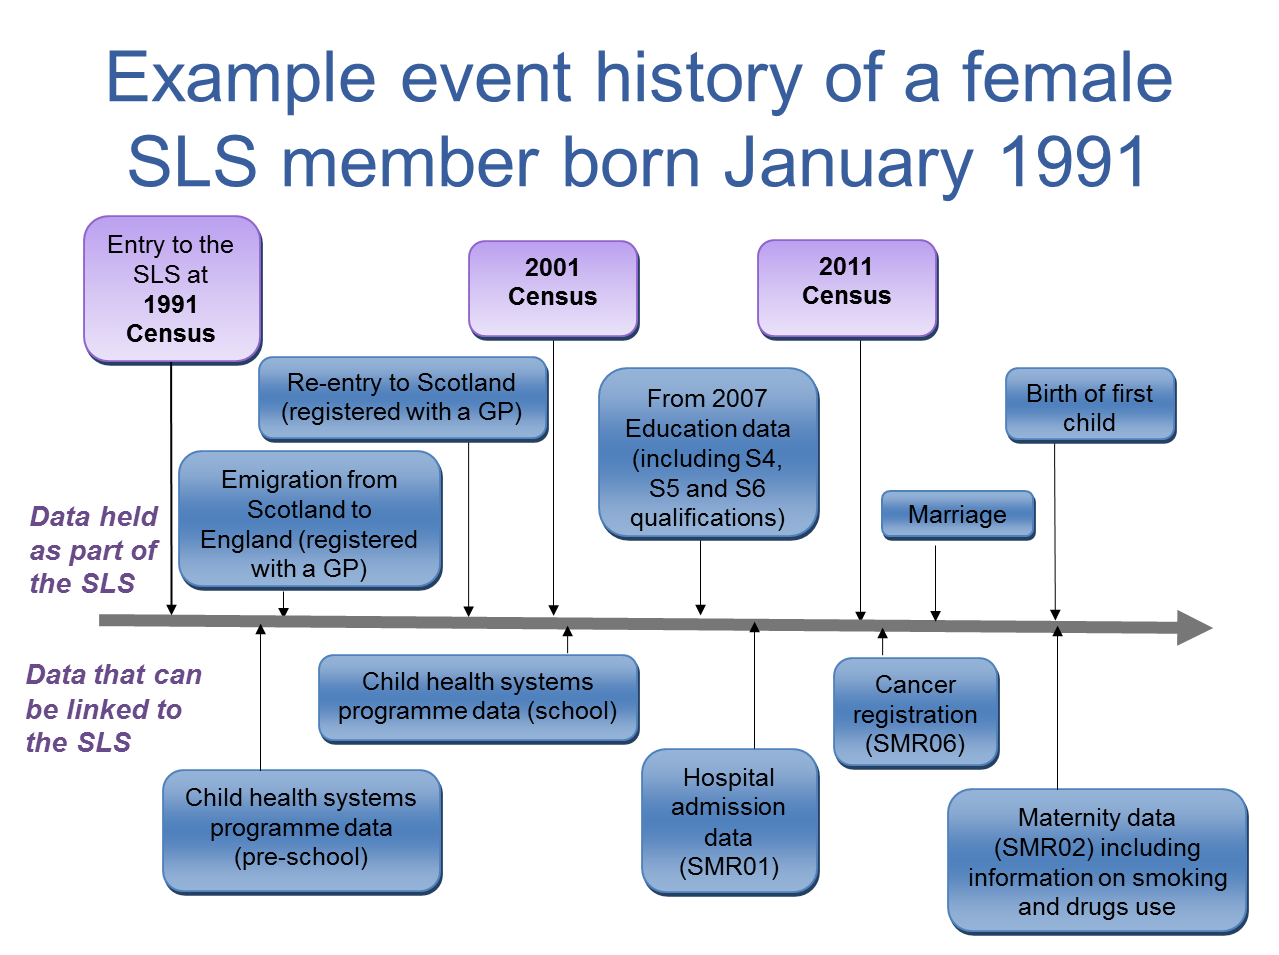 Timeline showing an example event history of a female SLS member